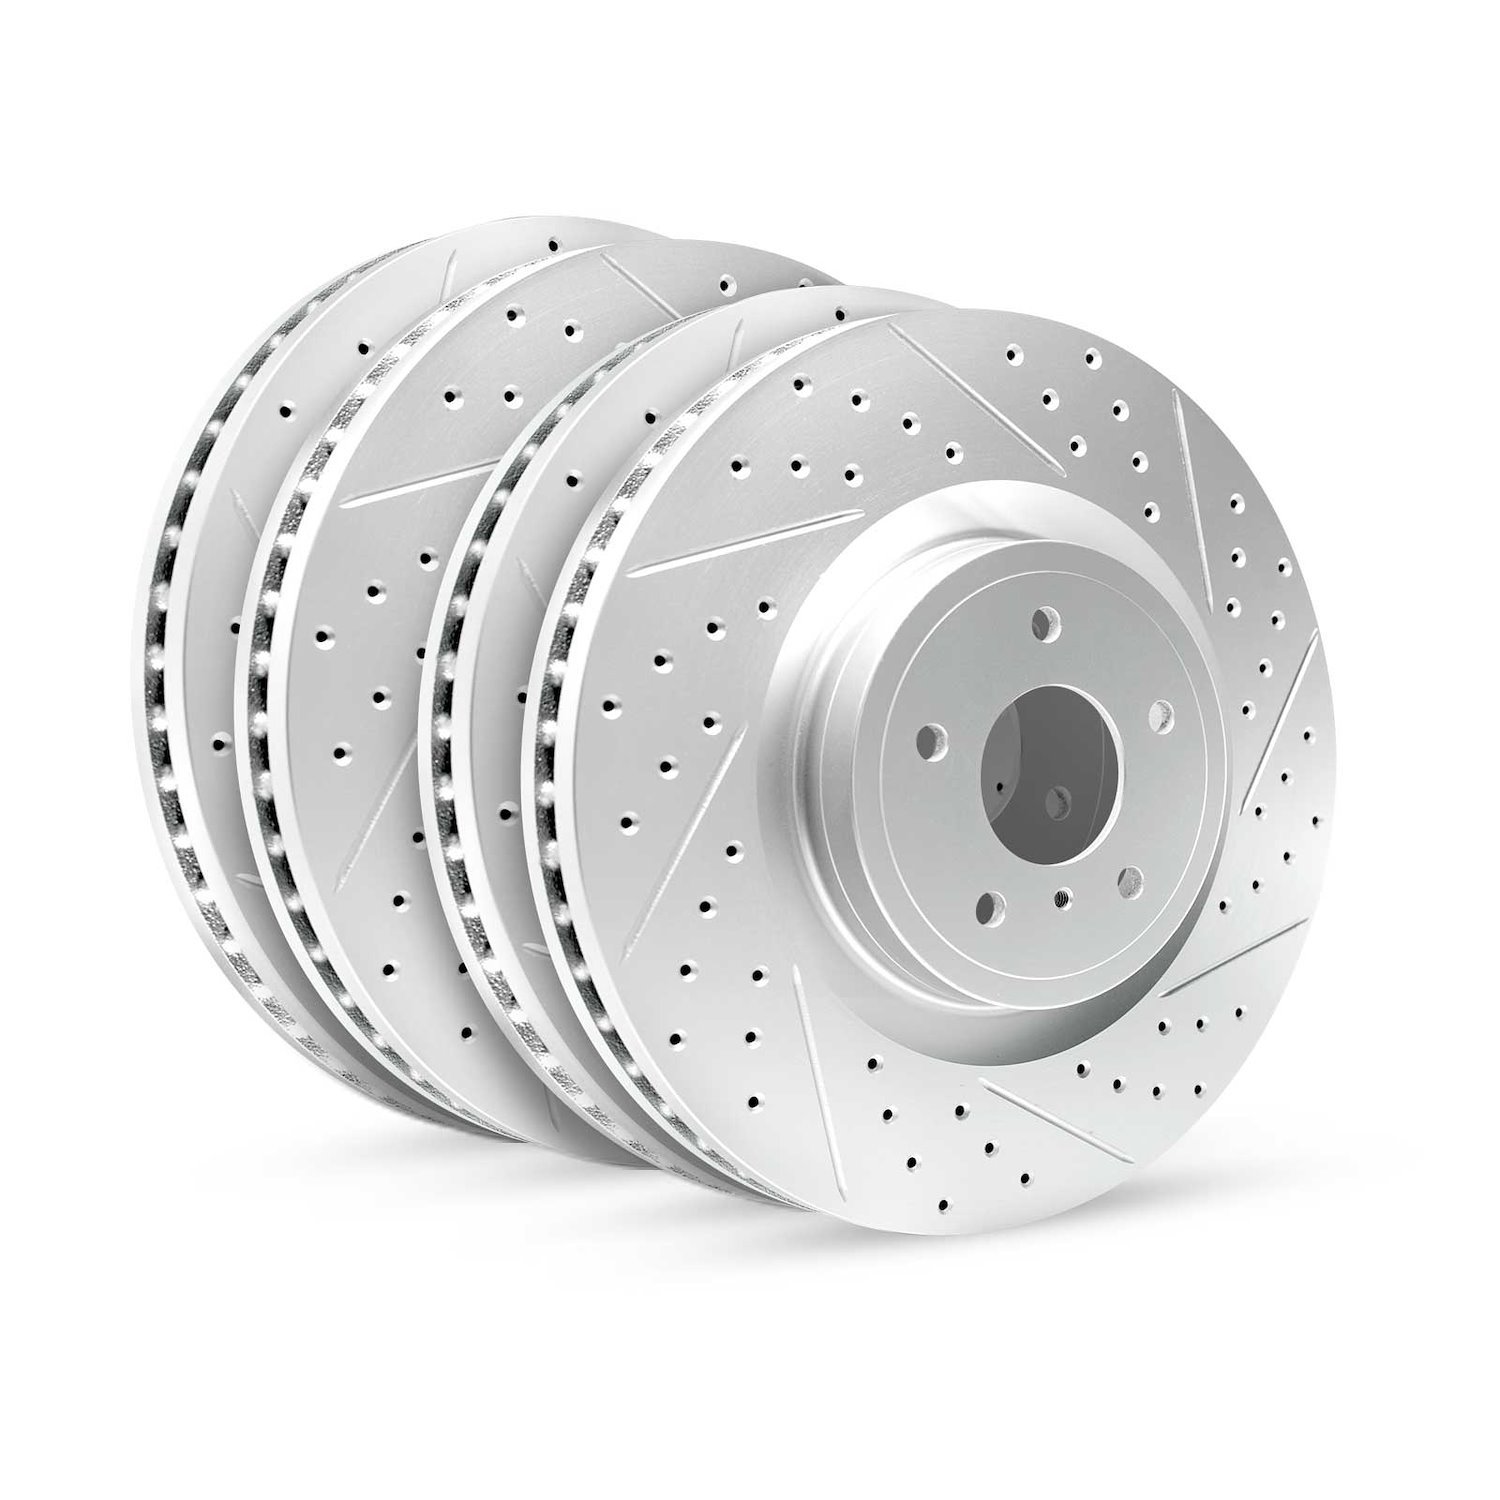 GEO-Carbon Drilled/Slotted Rotors, Fits Select Subaru, Position: Front/Rear